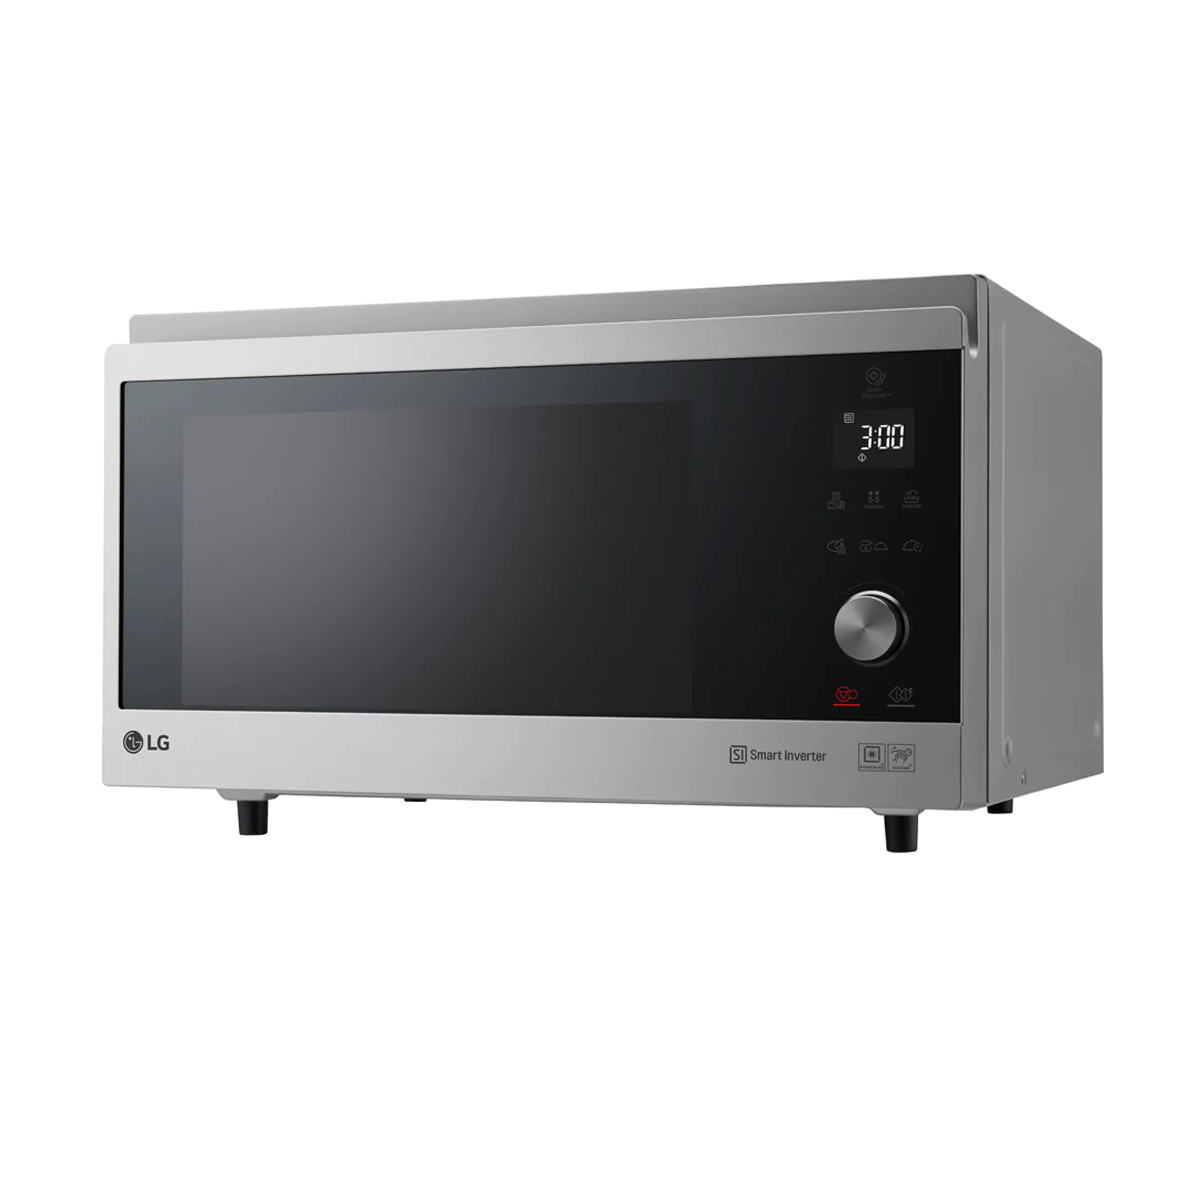 LG 39L Smart Inverter Microwave Oven, Convection + Grill